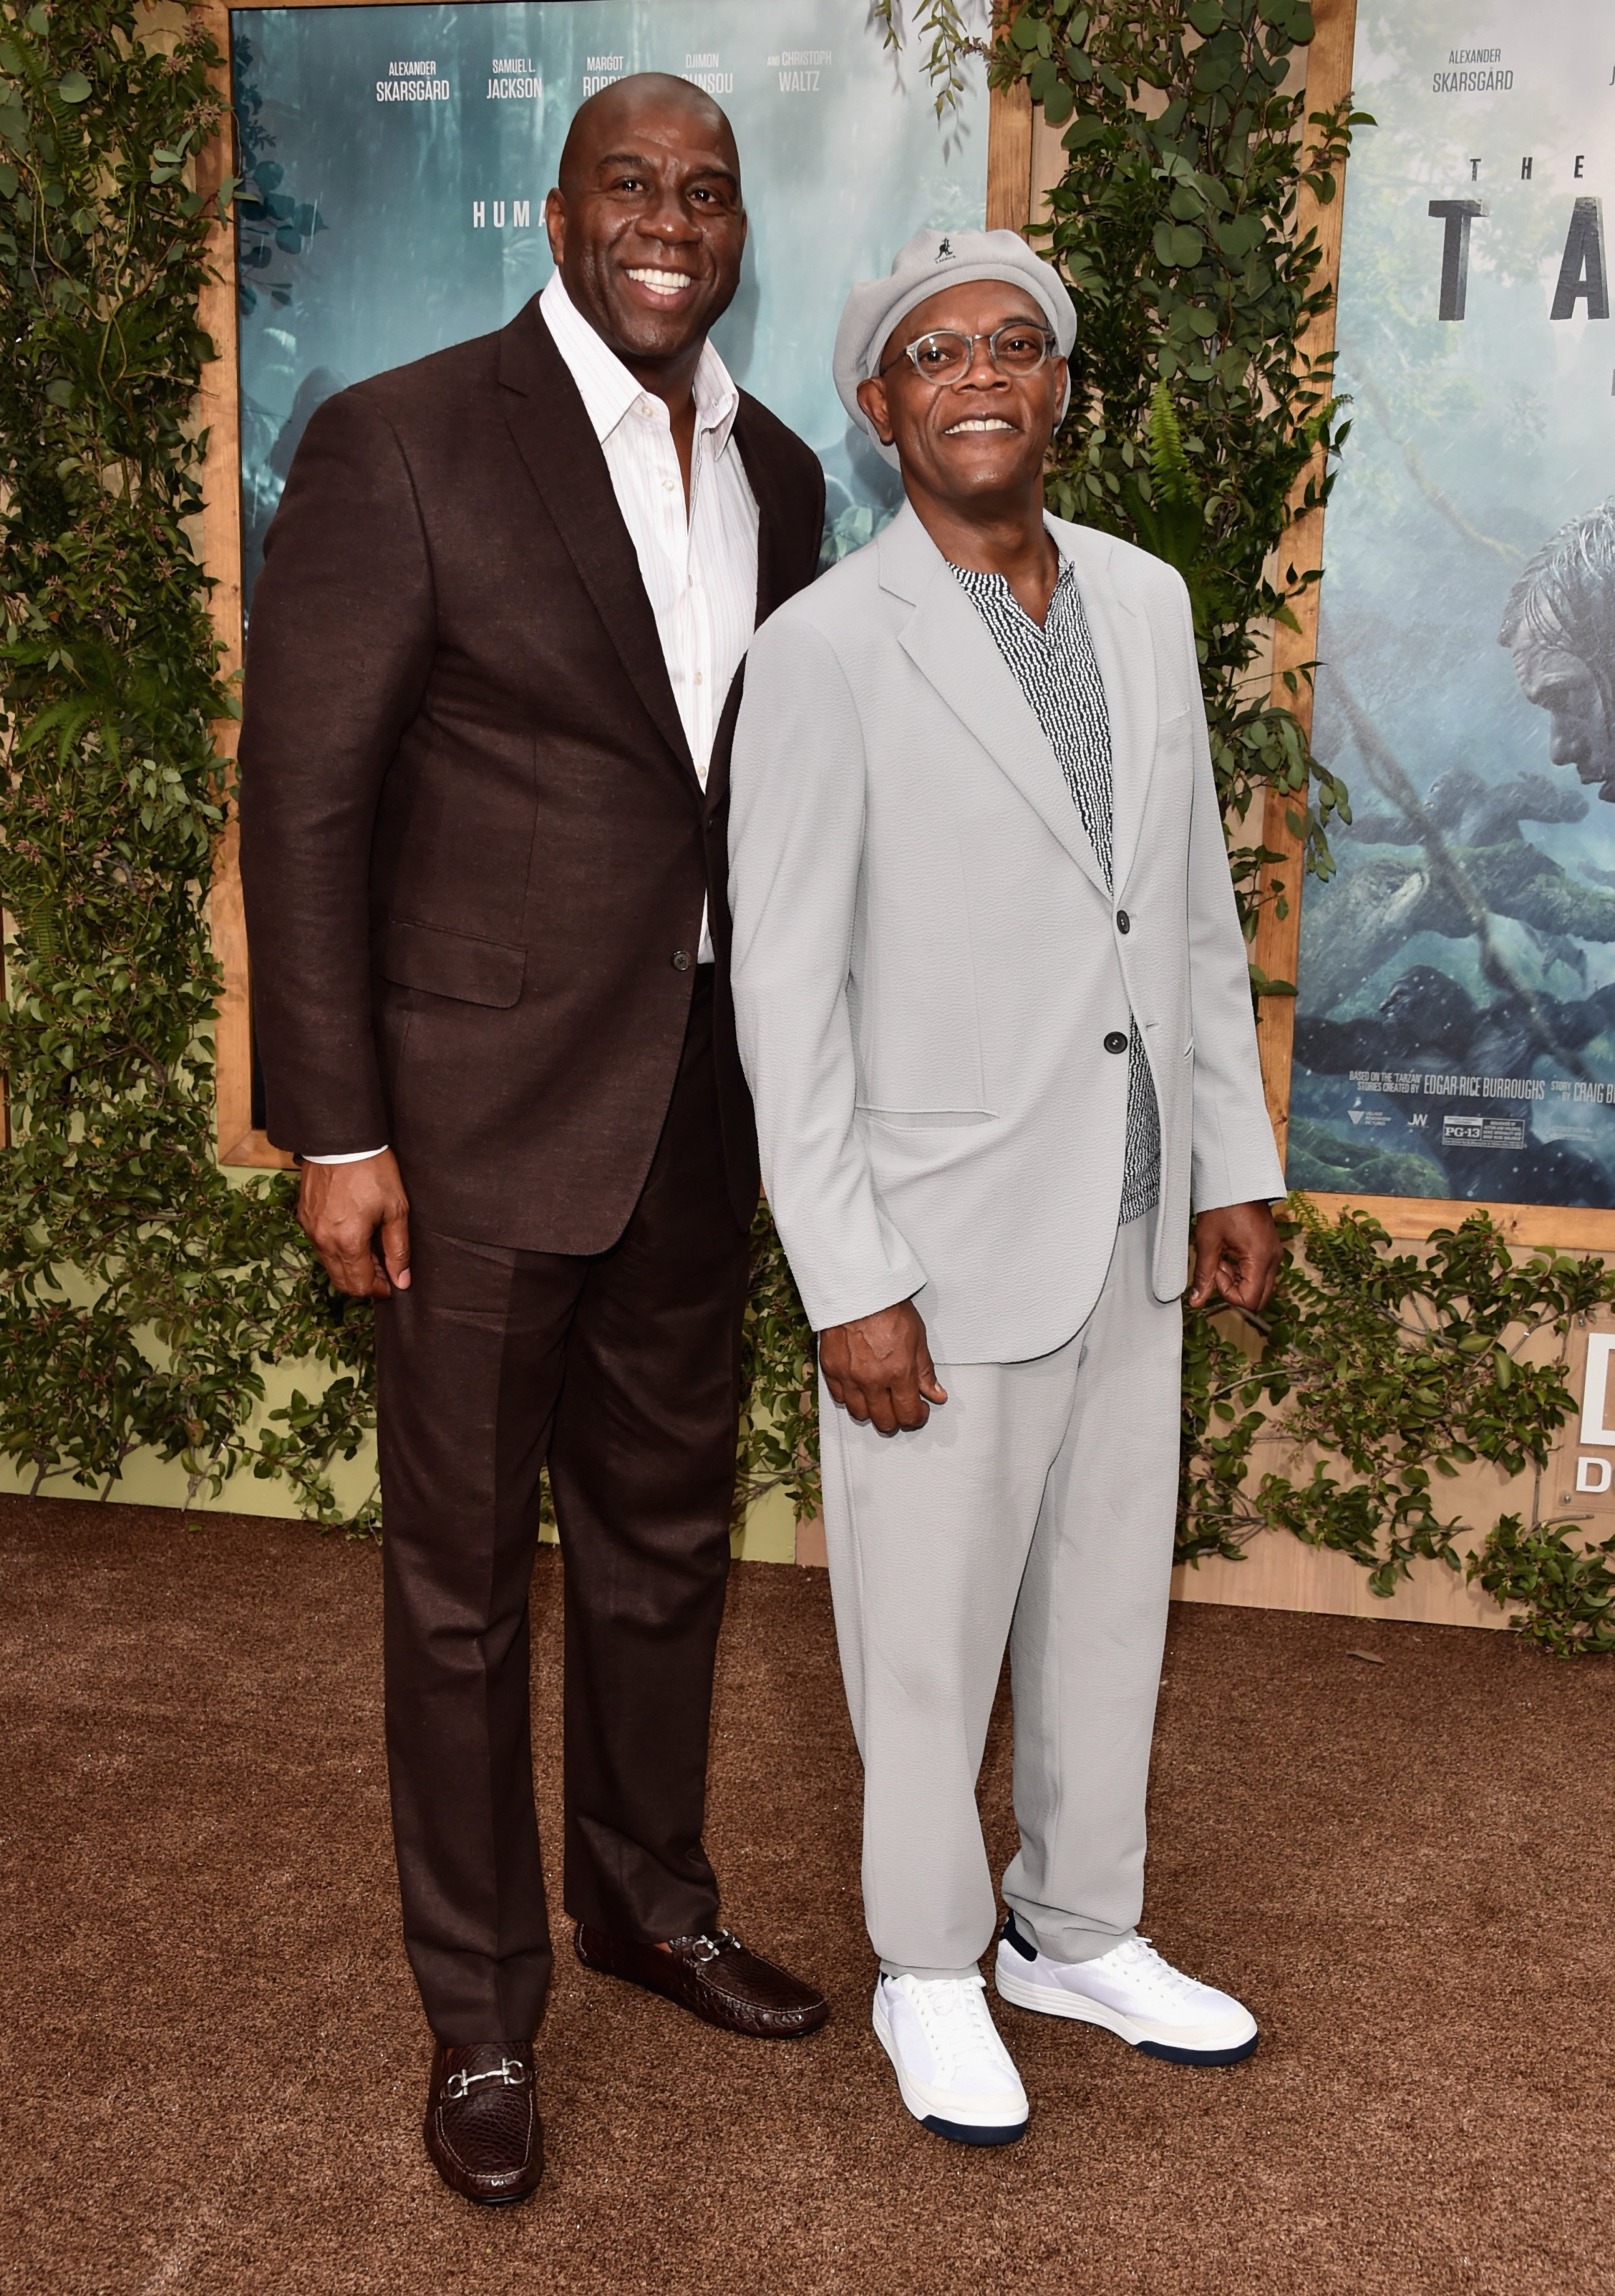 Magic Johnson & Samuel L. Jackson at the premiere of "The Legend of Tarzan" on June 27, 2016 in California | Photo: Getty Images